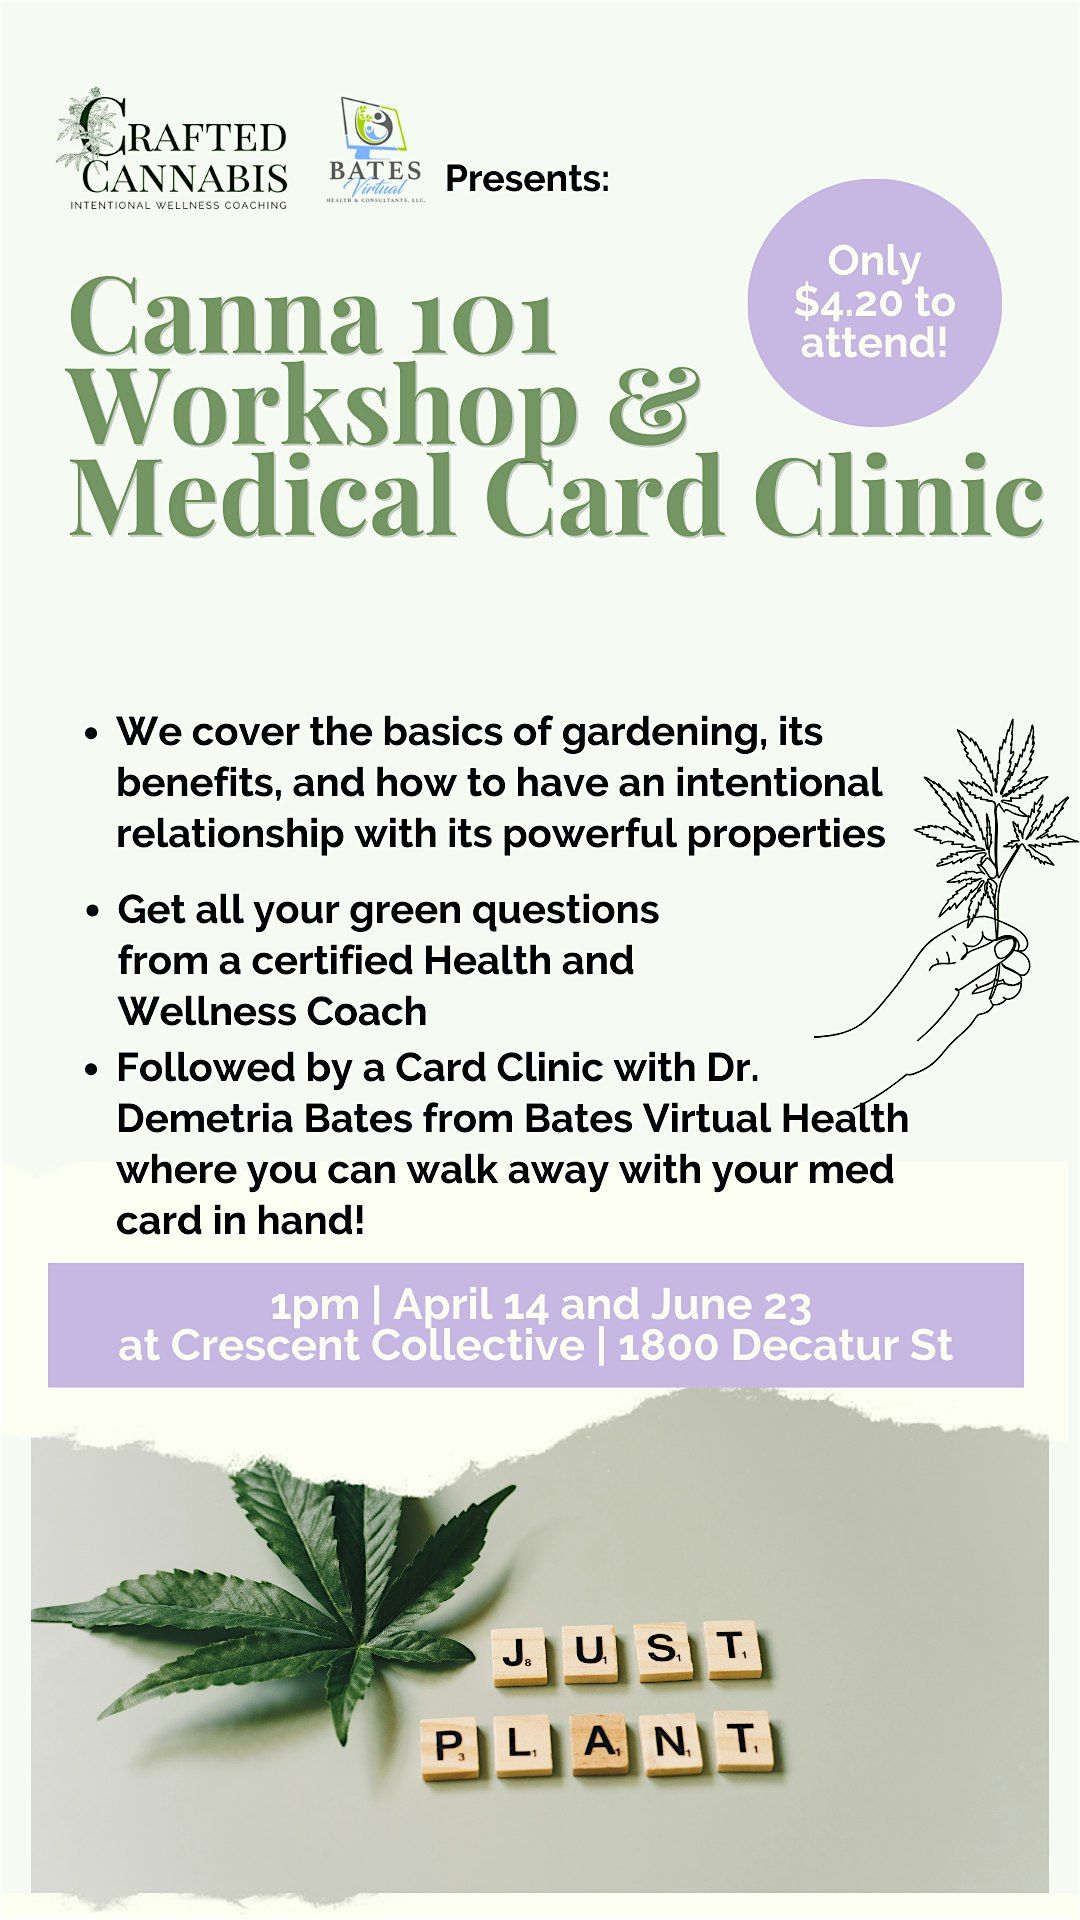 Elevate Your Wellness: Canna 101 Workshop & Medical Card Clinic